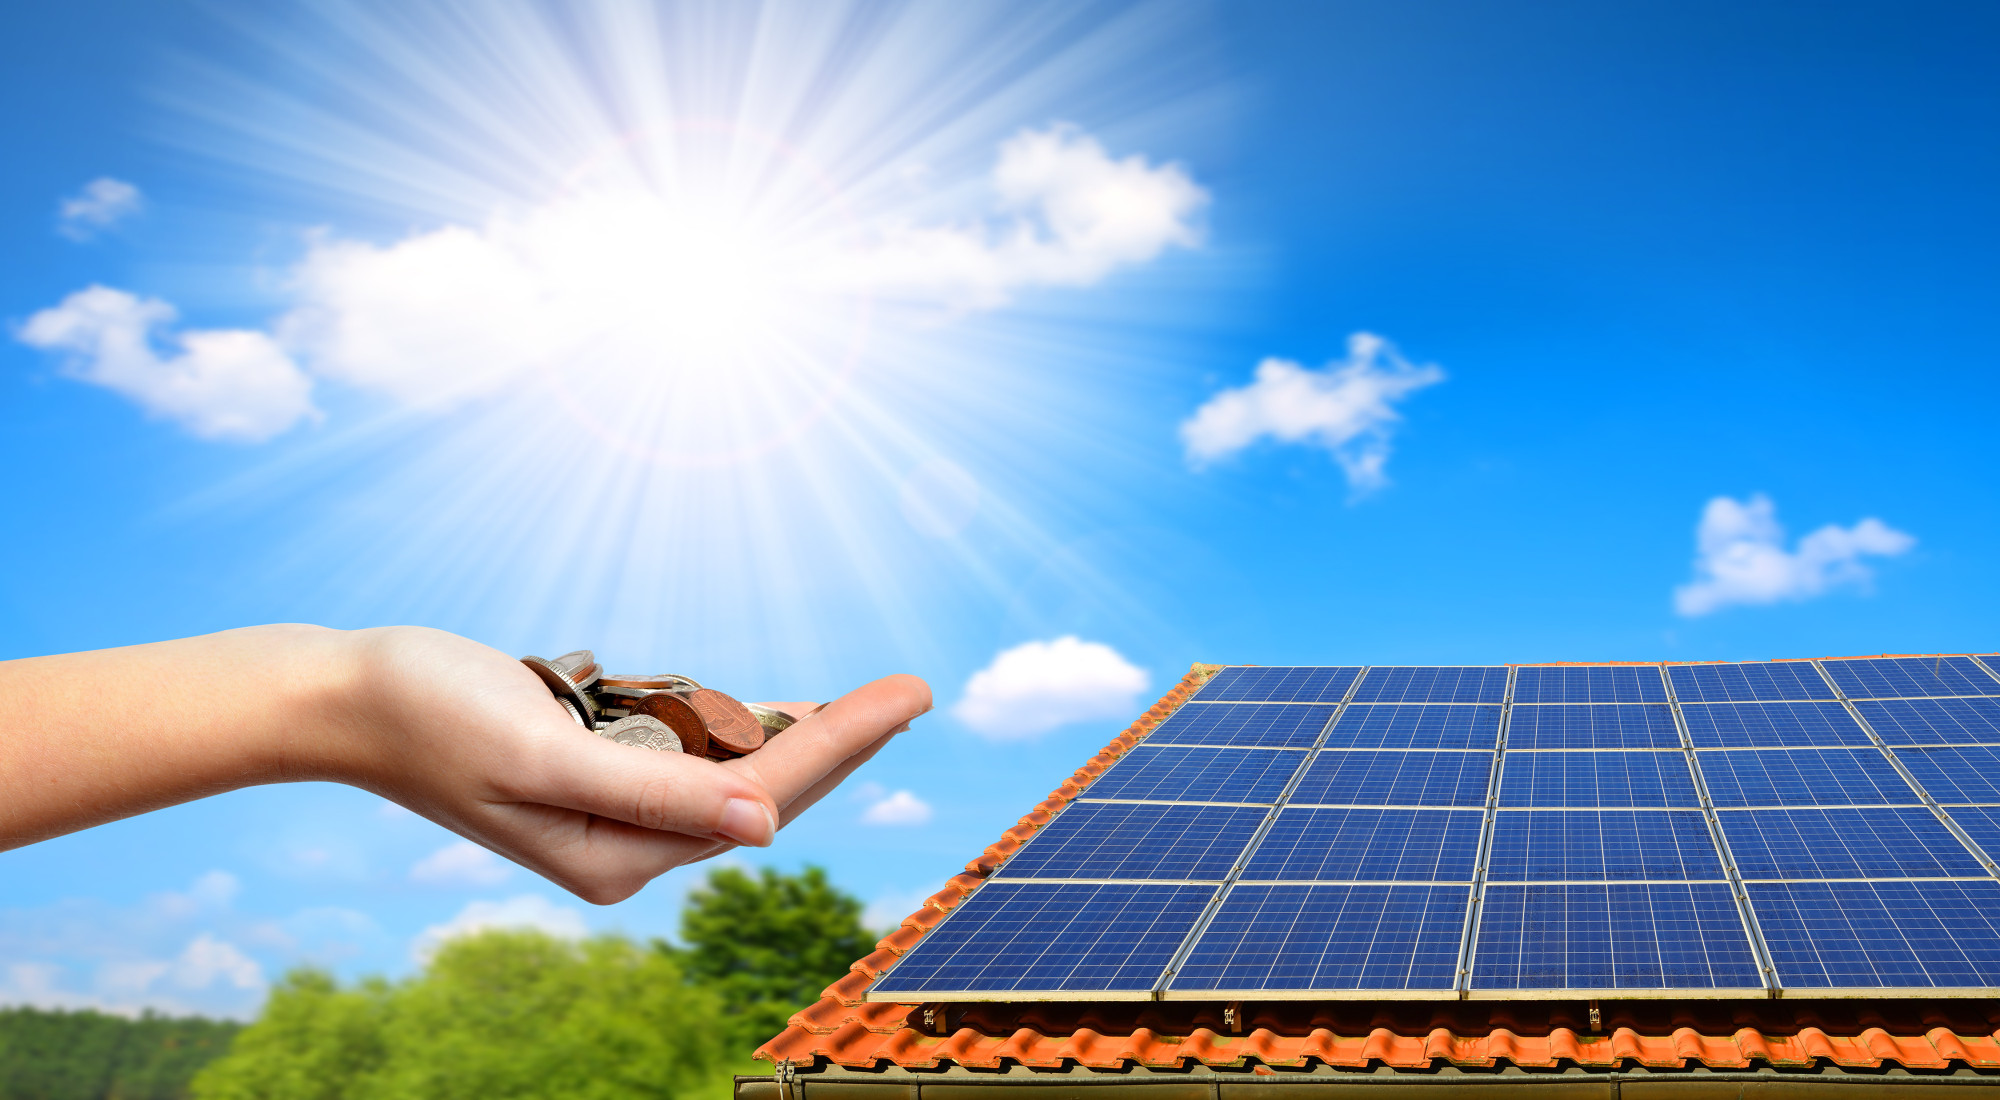 Solar panels can save you money on your utility bill. Here's a guide on how much you can save with solar panels every month.